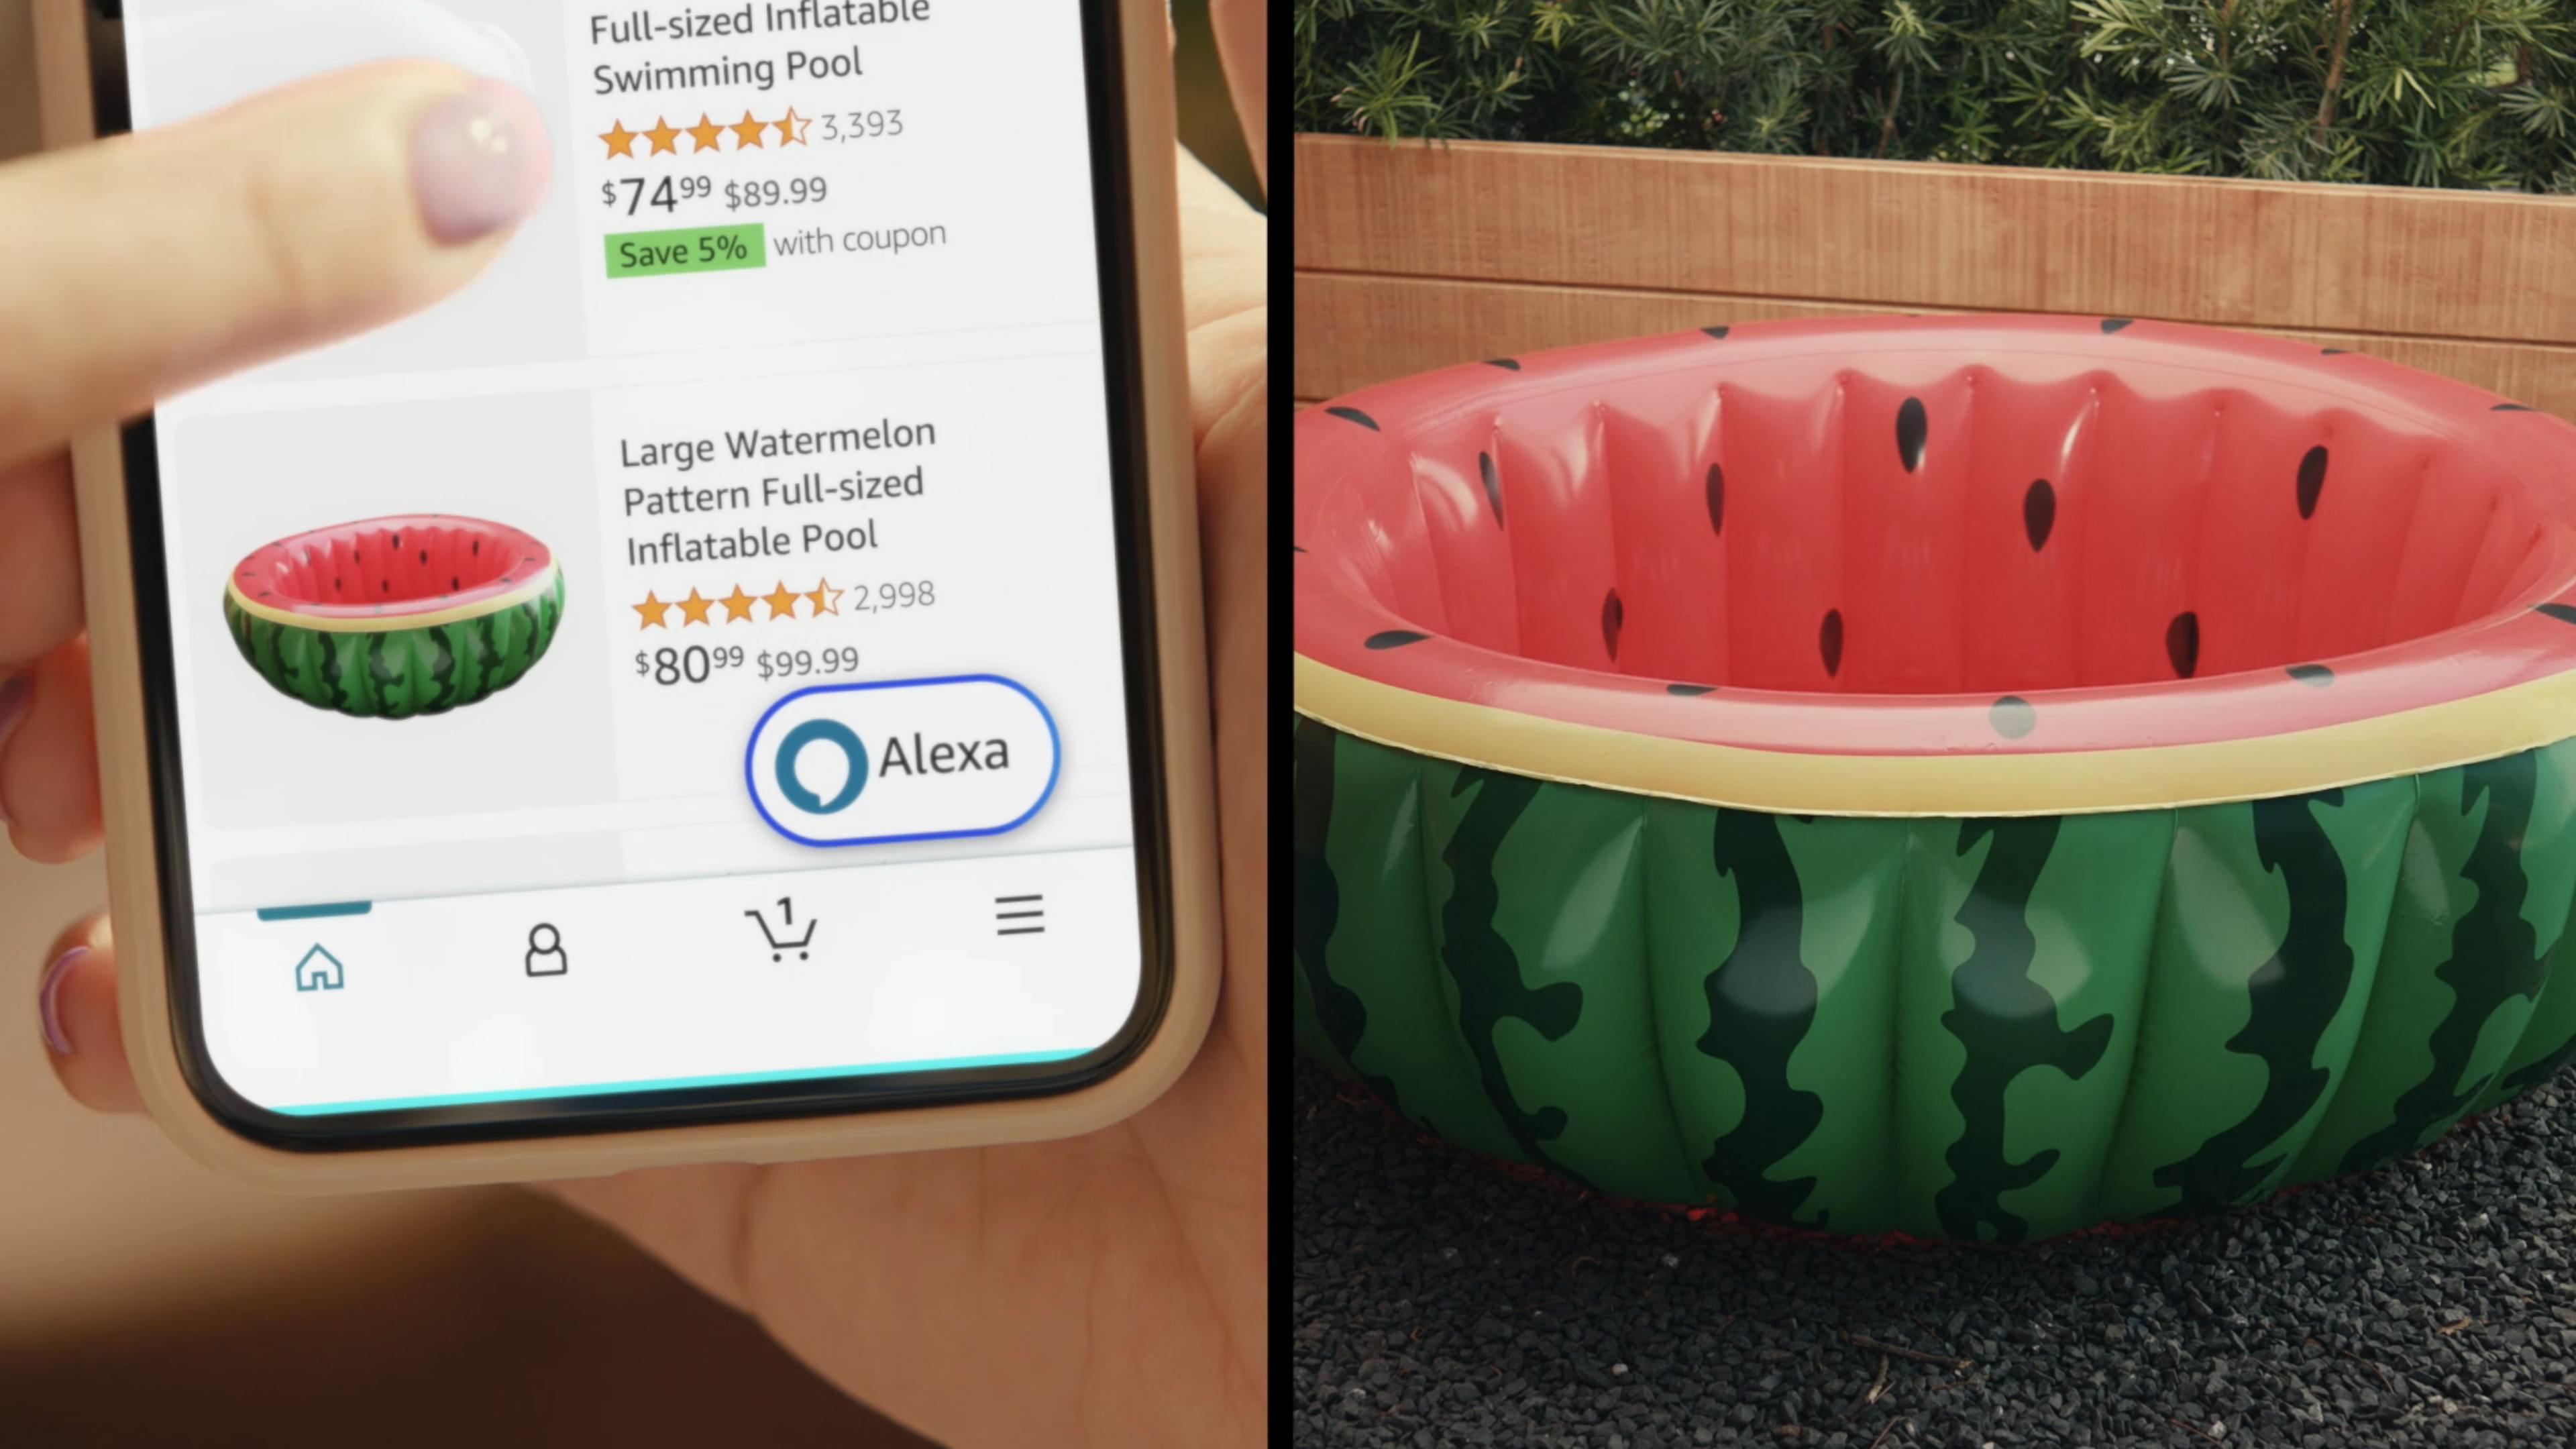 A diptych showing two photos: on the left, a phone on the Amazon app showing an inflatable pool in the pattern of a watermelon, on the right the inflatable watermelon pool on a porch